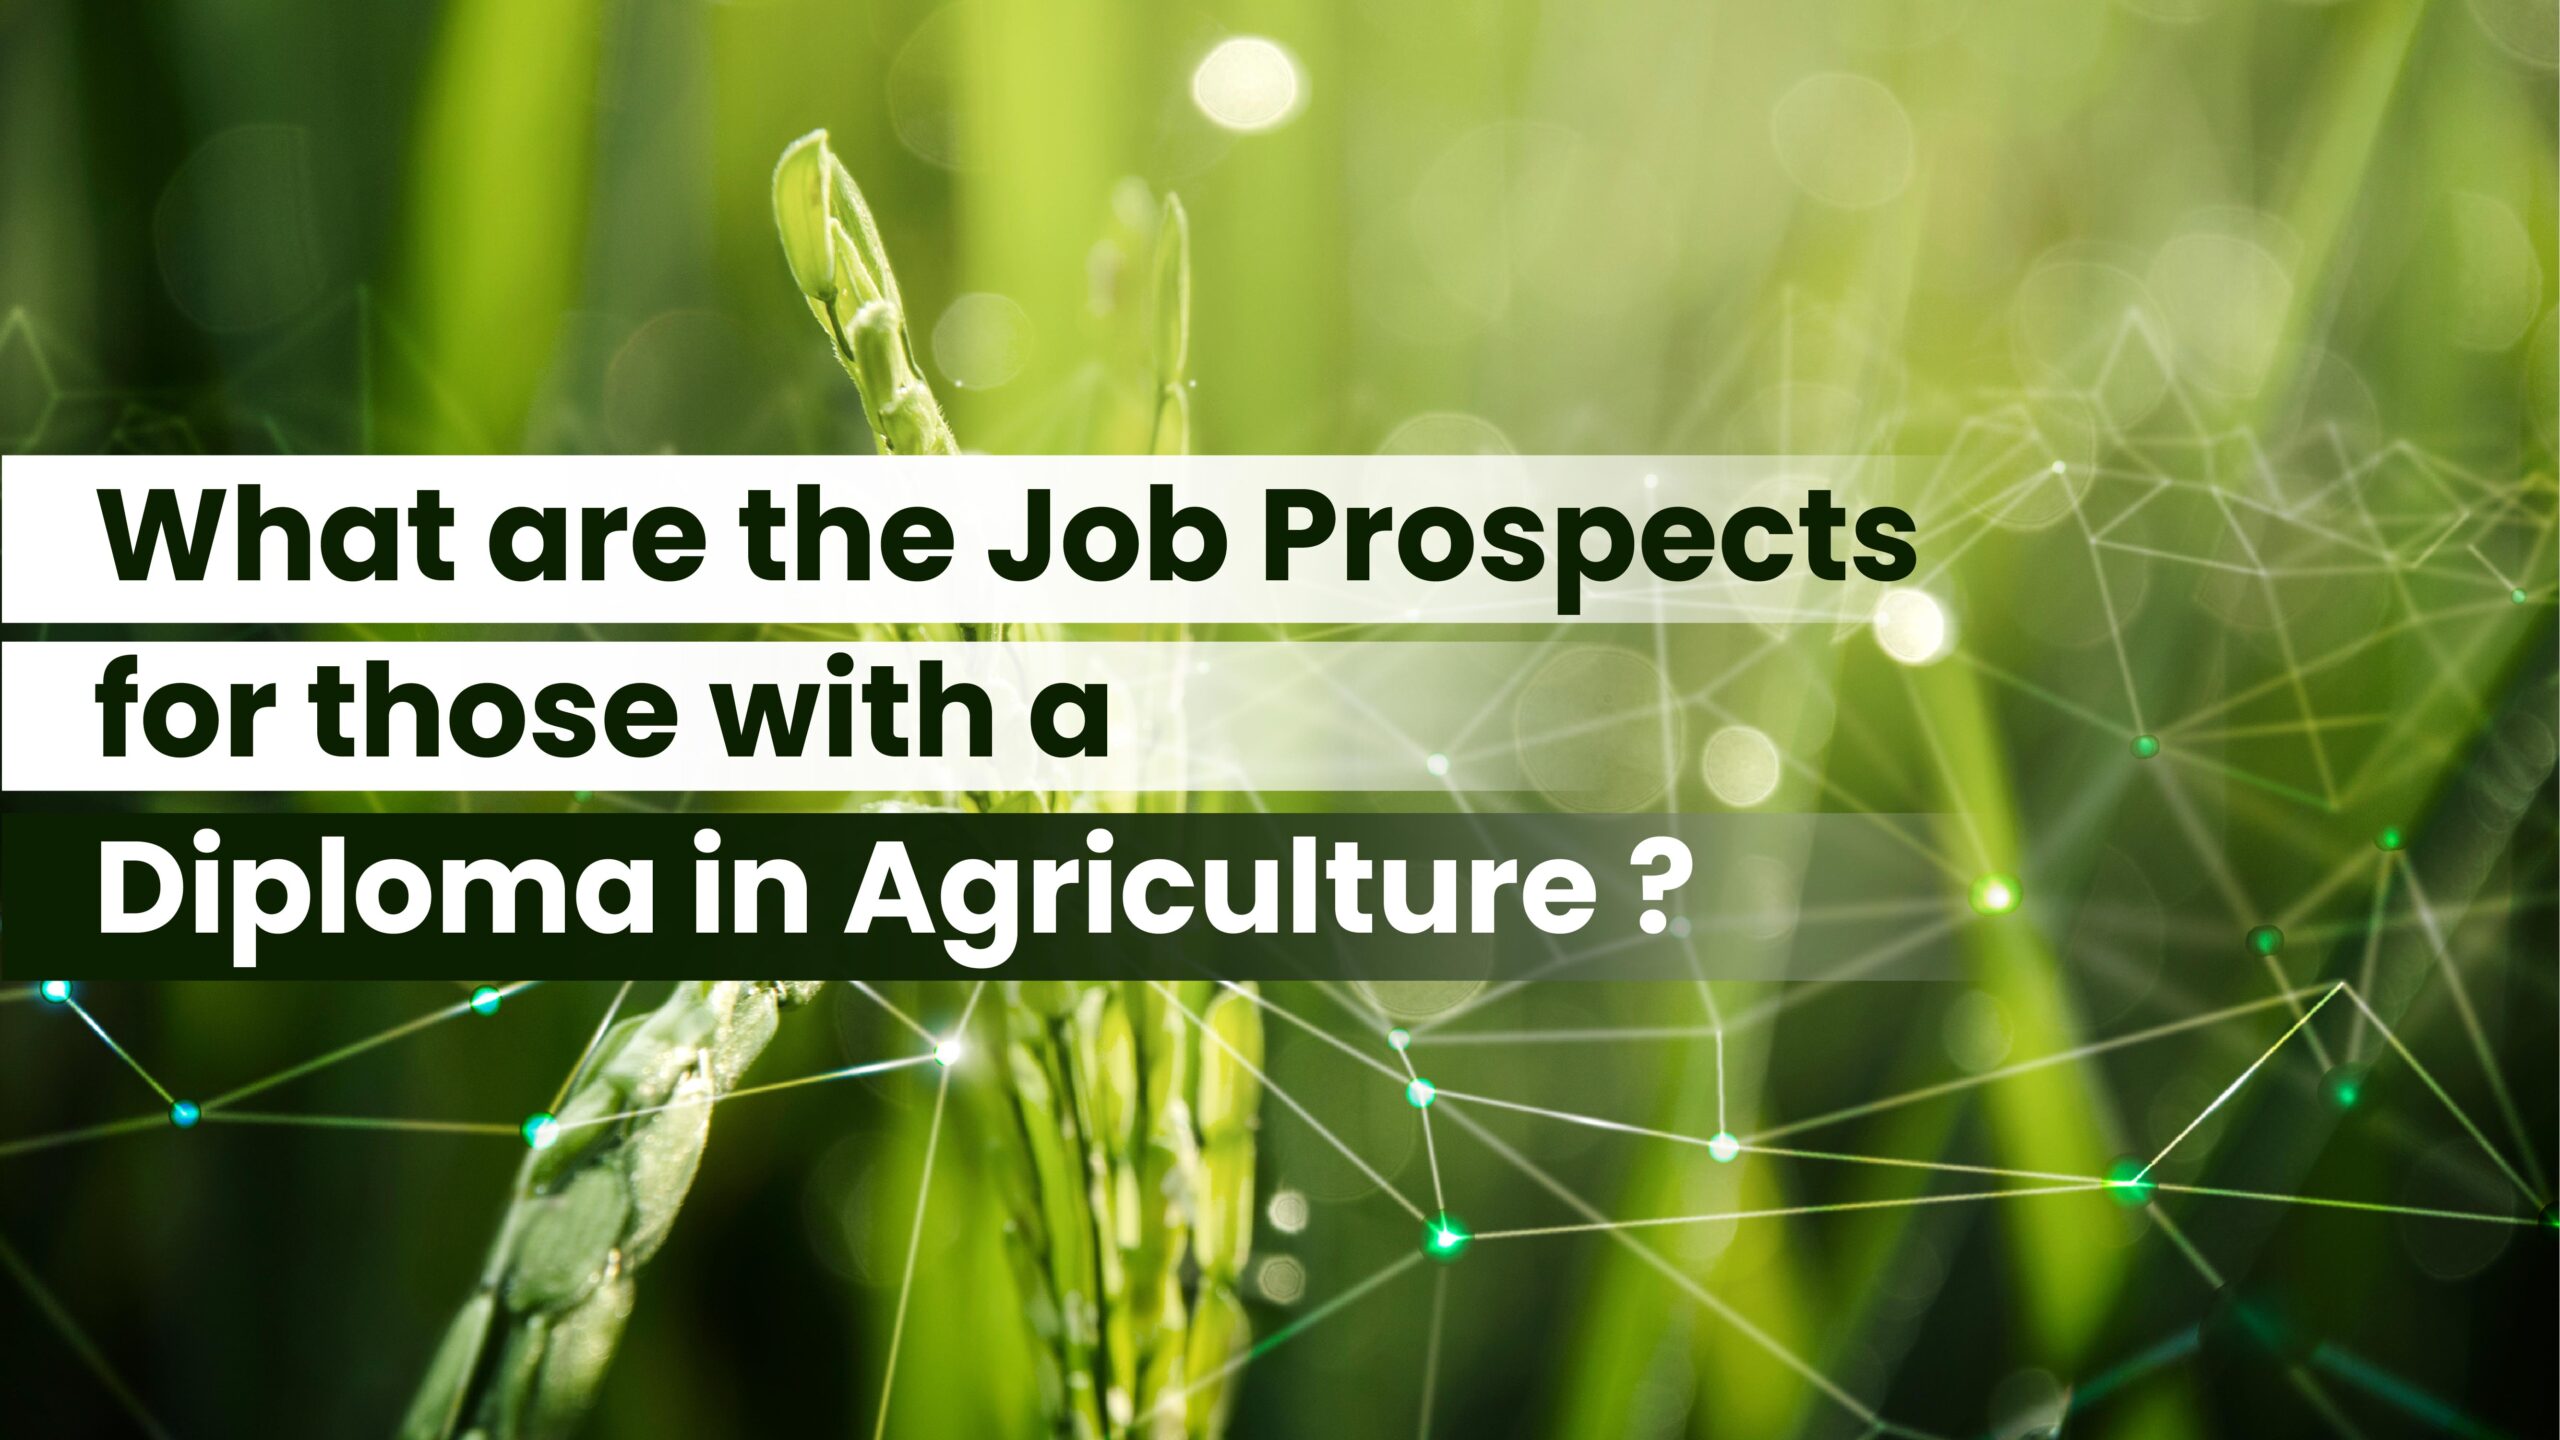 What are the Job Prospects for those with a Diploma in Agriculture?